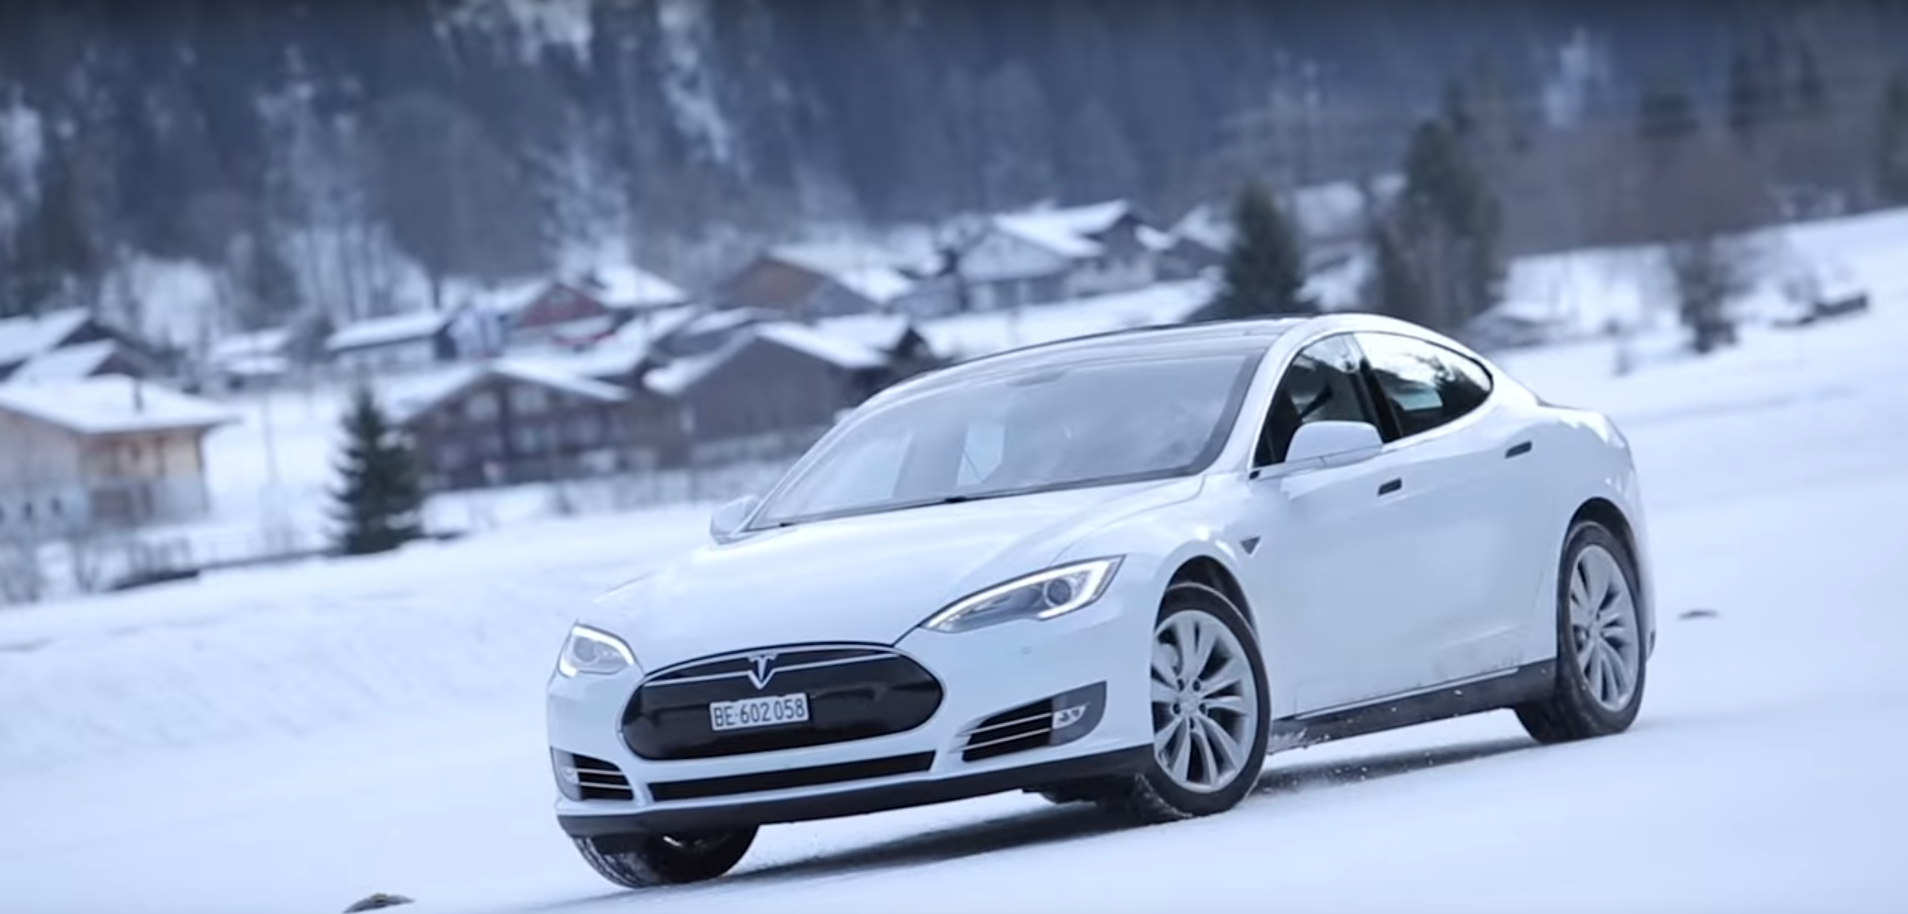 Tesla highlights winter driving with the Model S as Northeast remains